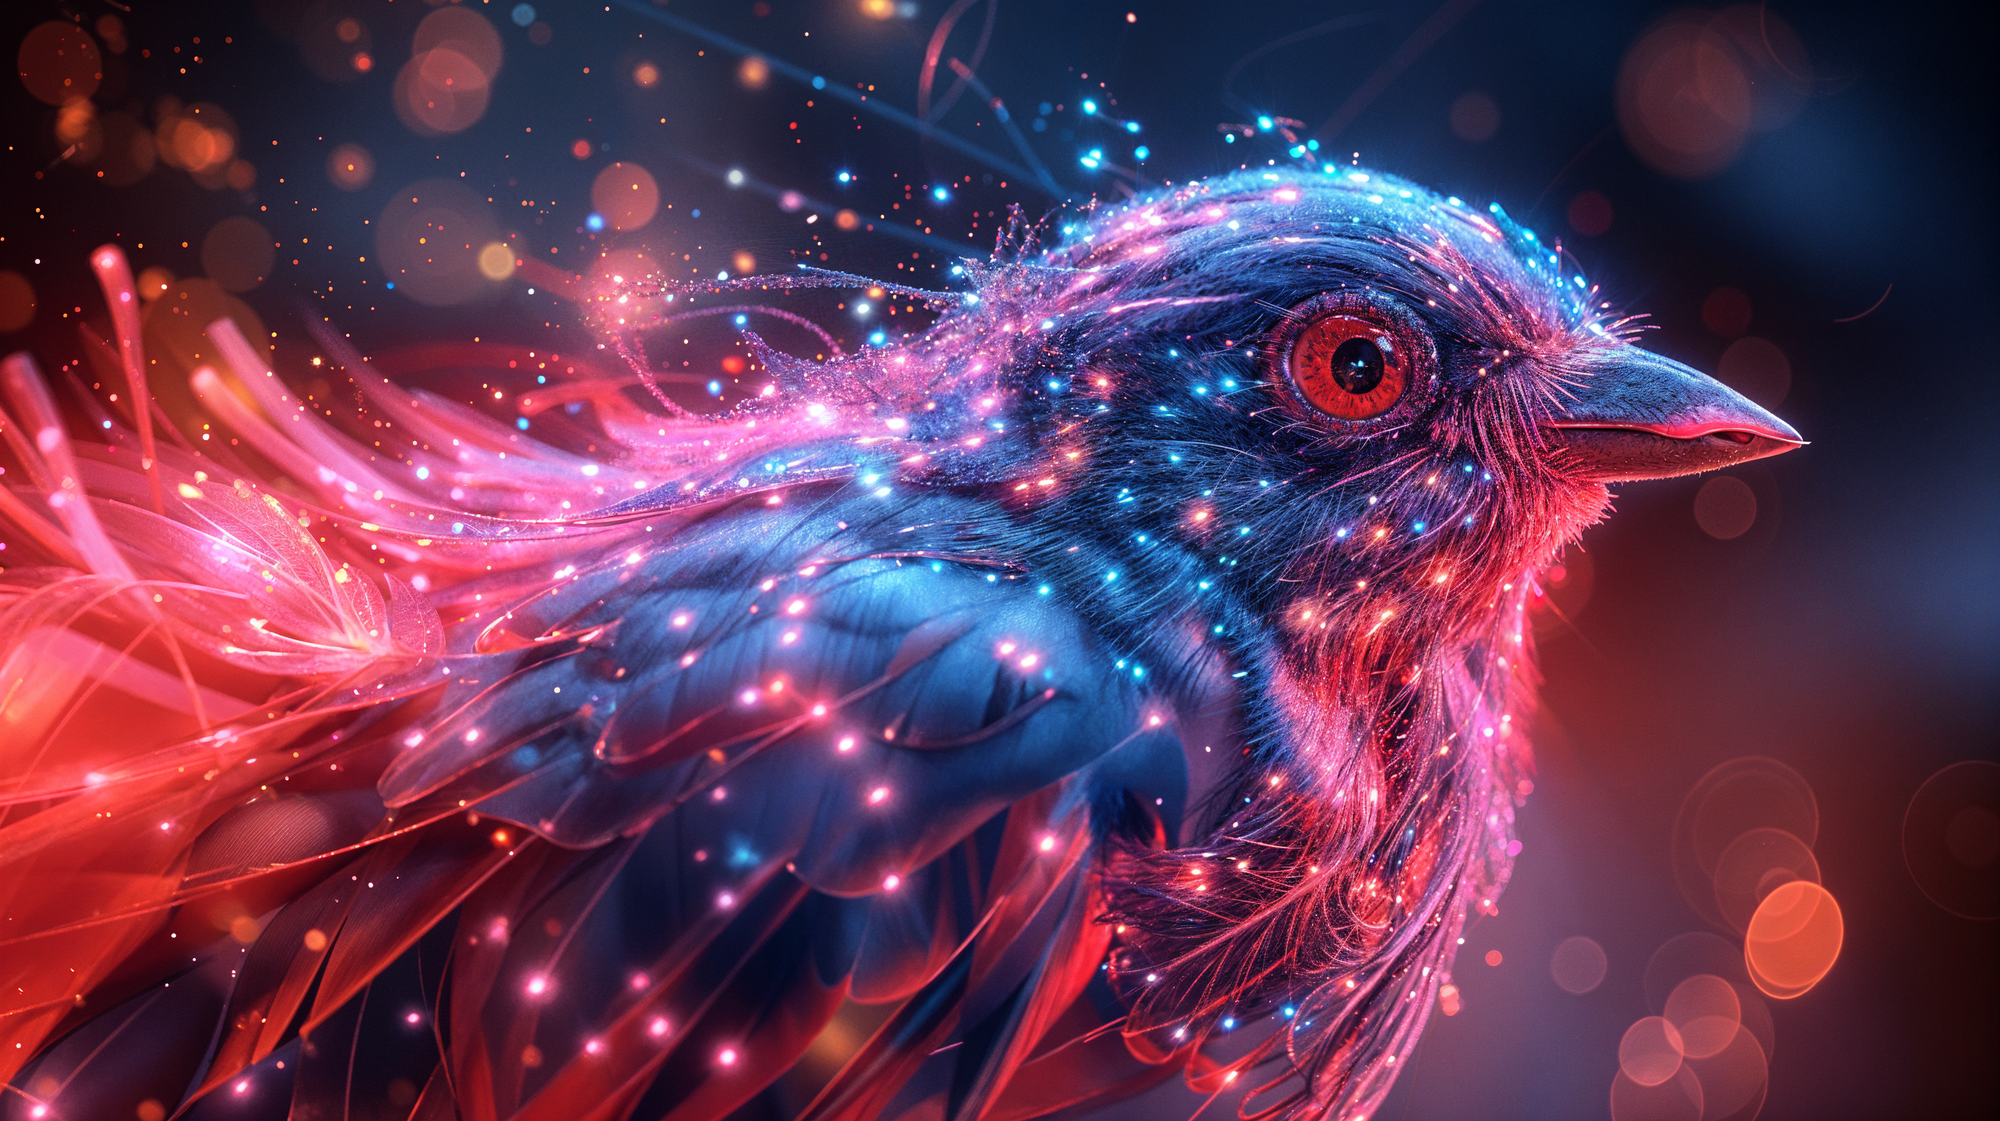 Digital art of a mystical red and blue bird with colorful lights and sparks against a gradient background.